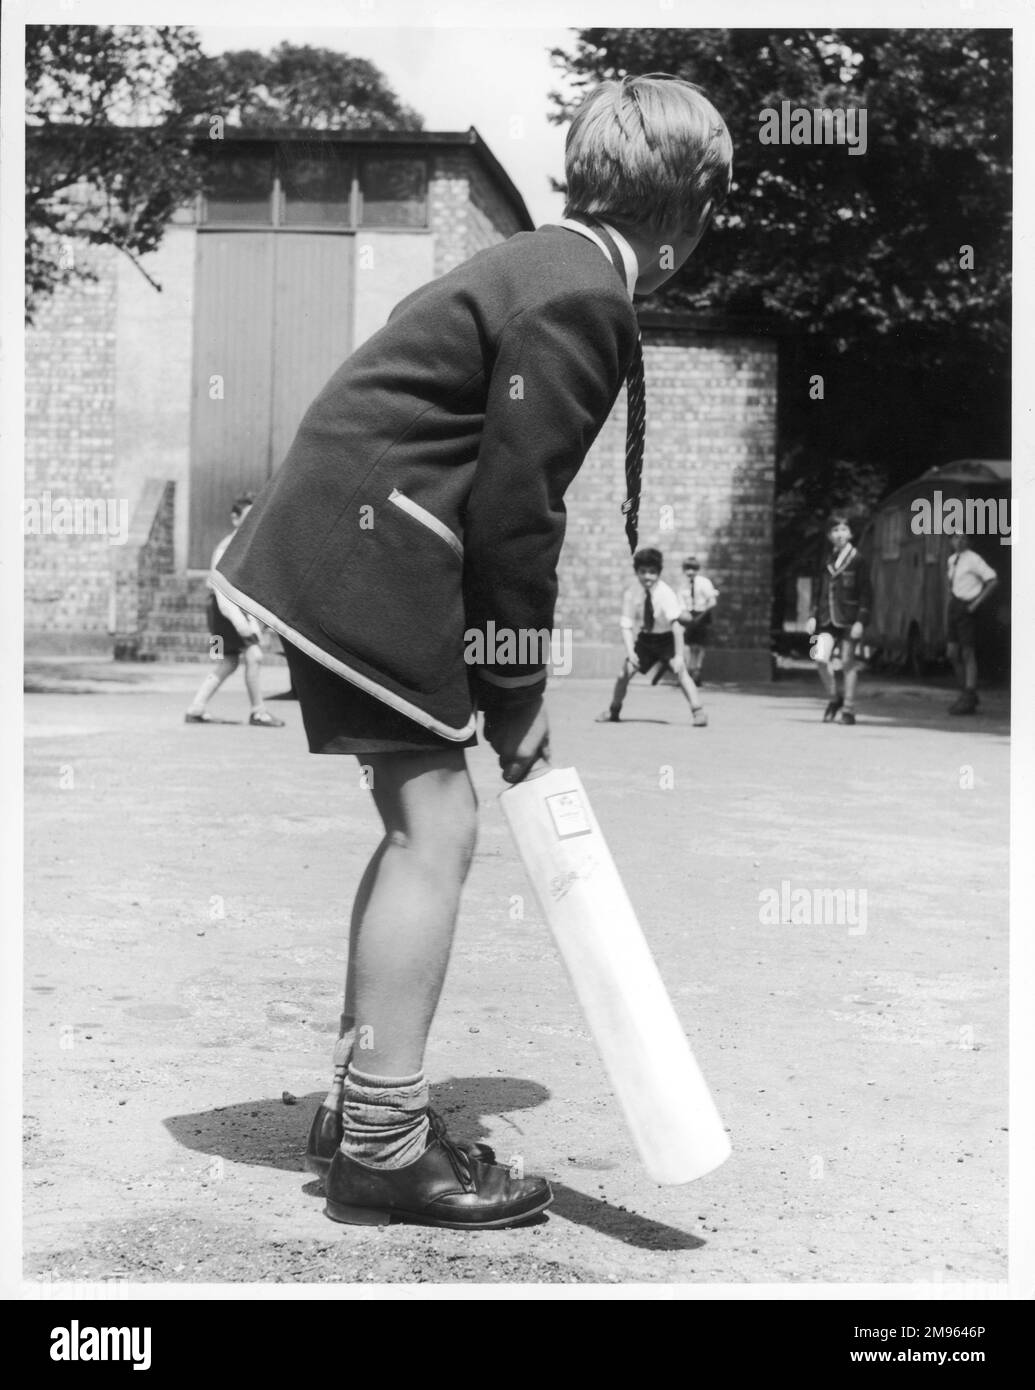 Schoolboys playing an impromptu game of cricket; one boy prepares to bat Stock Photo